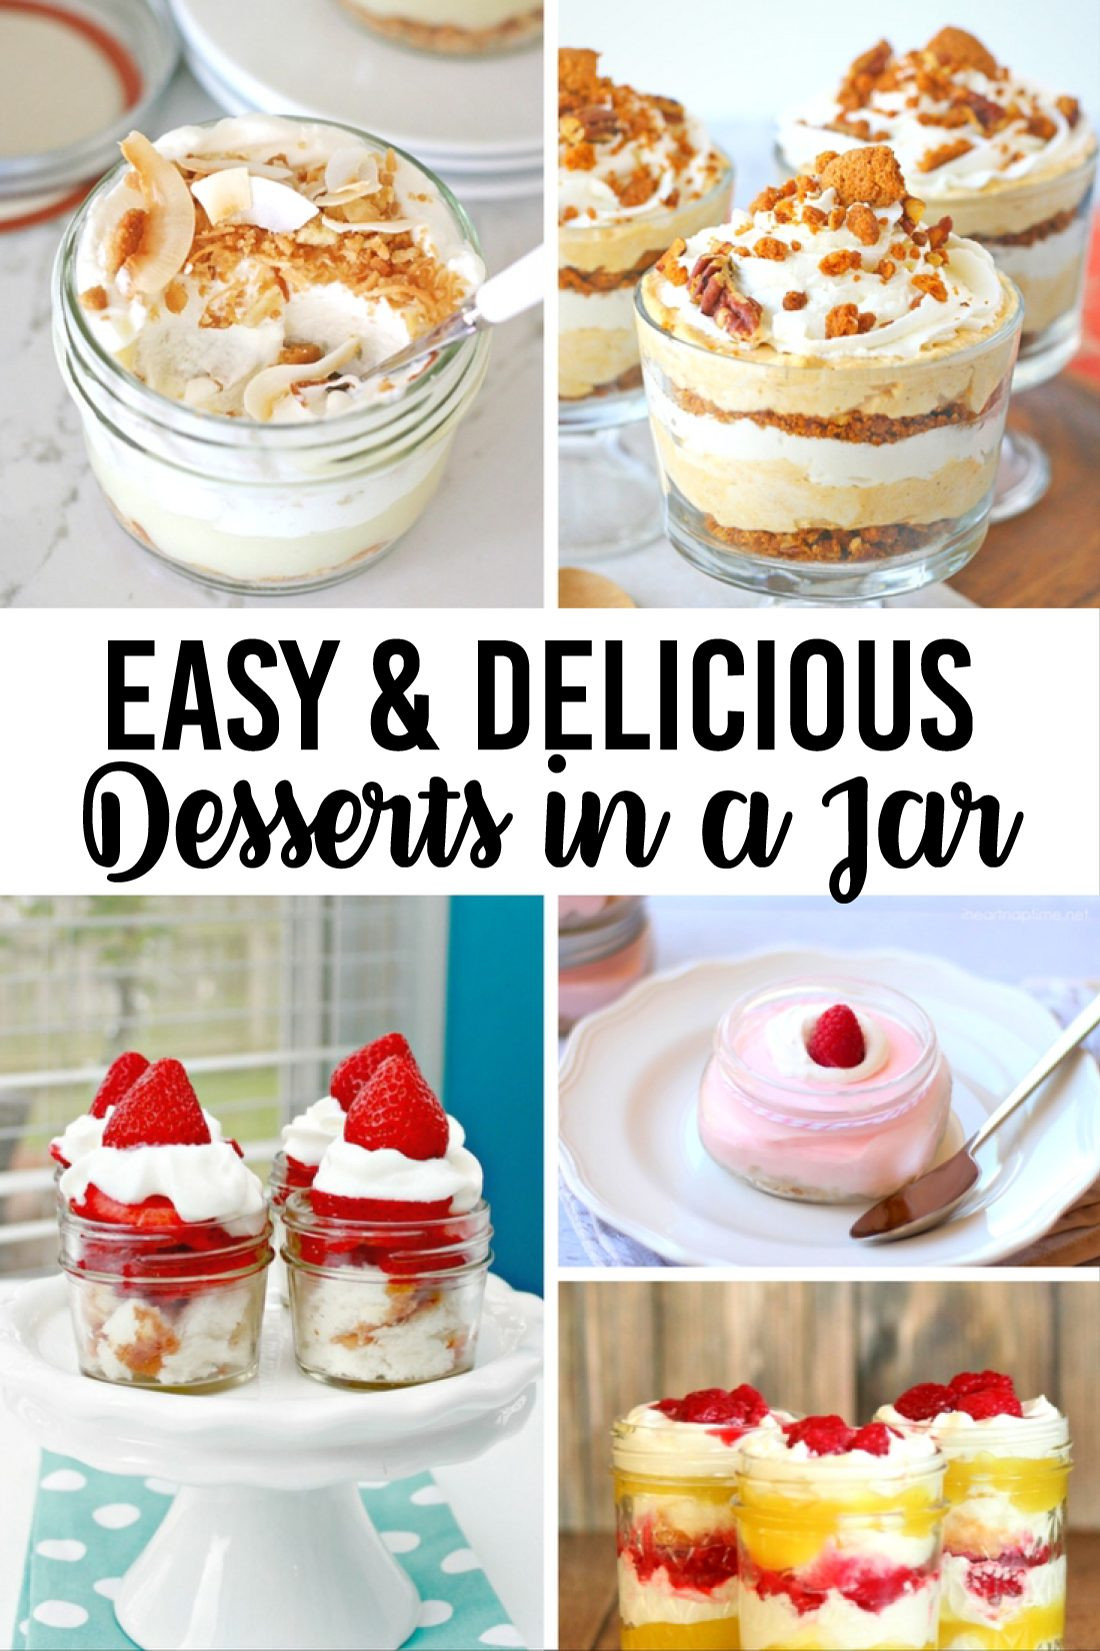 Tasty Dessert Recipes
 20 Easy and Delicious Desserts in a Jar